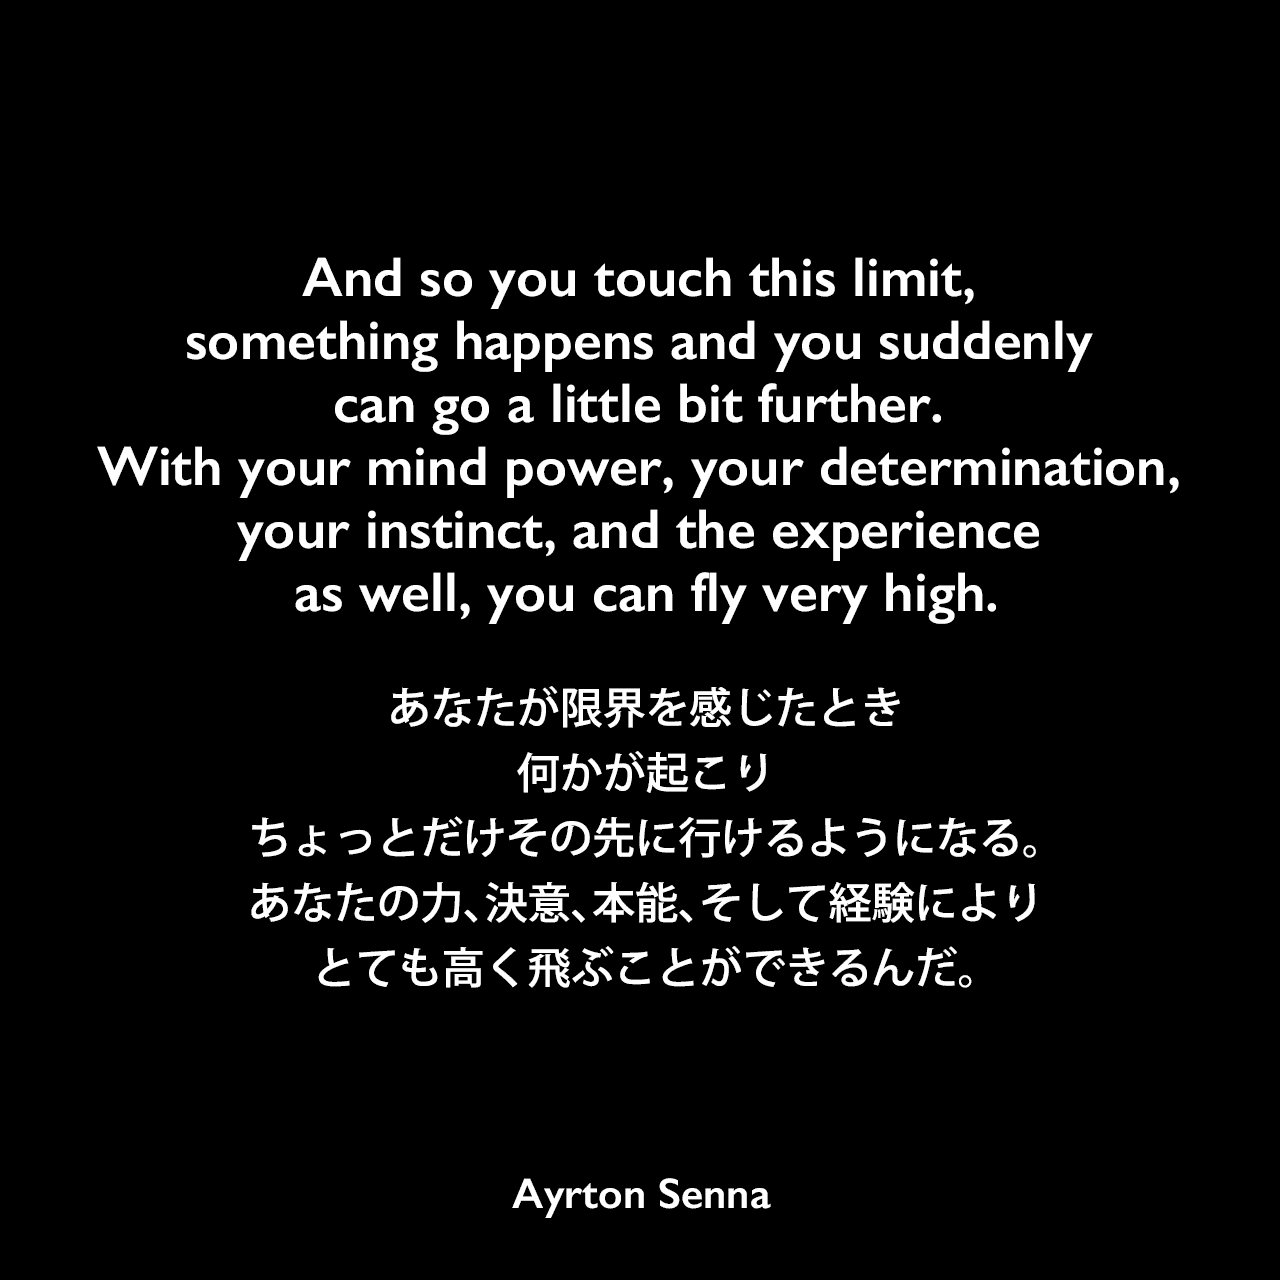 And so you touch this limit, something happens and you suddenly can go a little bit further. With your mind power, your determination, your instinct, and the experience as well, you can fly very high.あなたが限界を感じたとき、何かが起こり、ちょっとだけその先に行けるようになる。あなたの力、決意、本能、そして経験によりとても高く飛ぶことができるんだ。Ayrton Senna